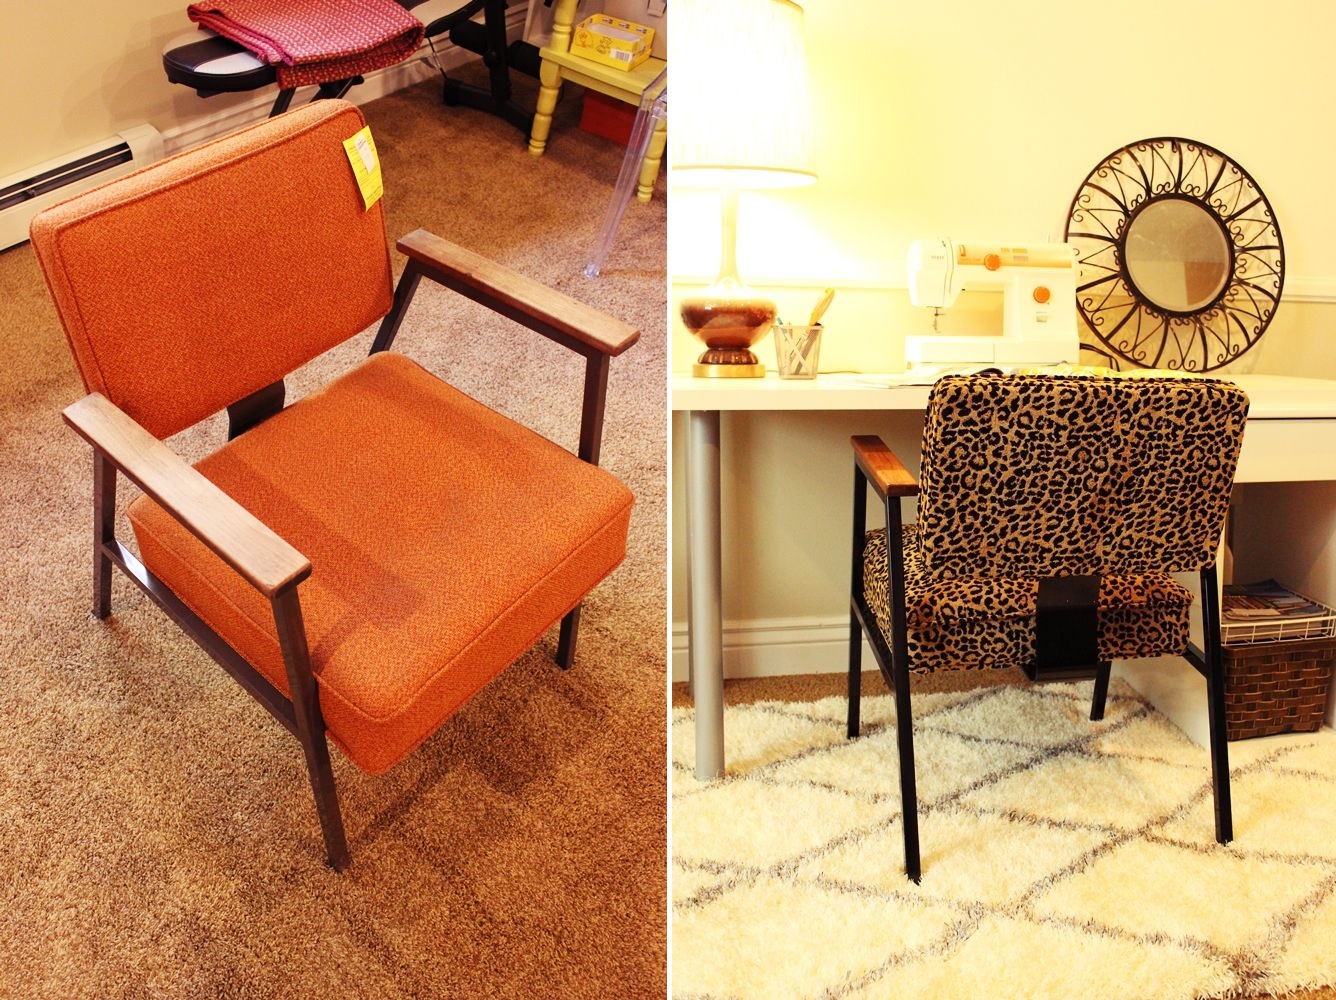 Before and after Chair Reupholstered